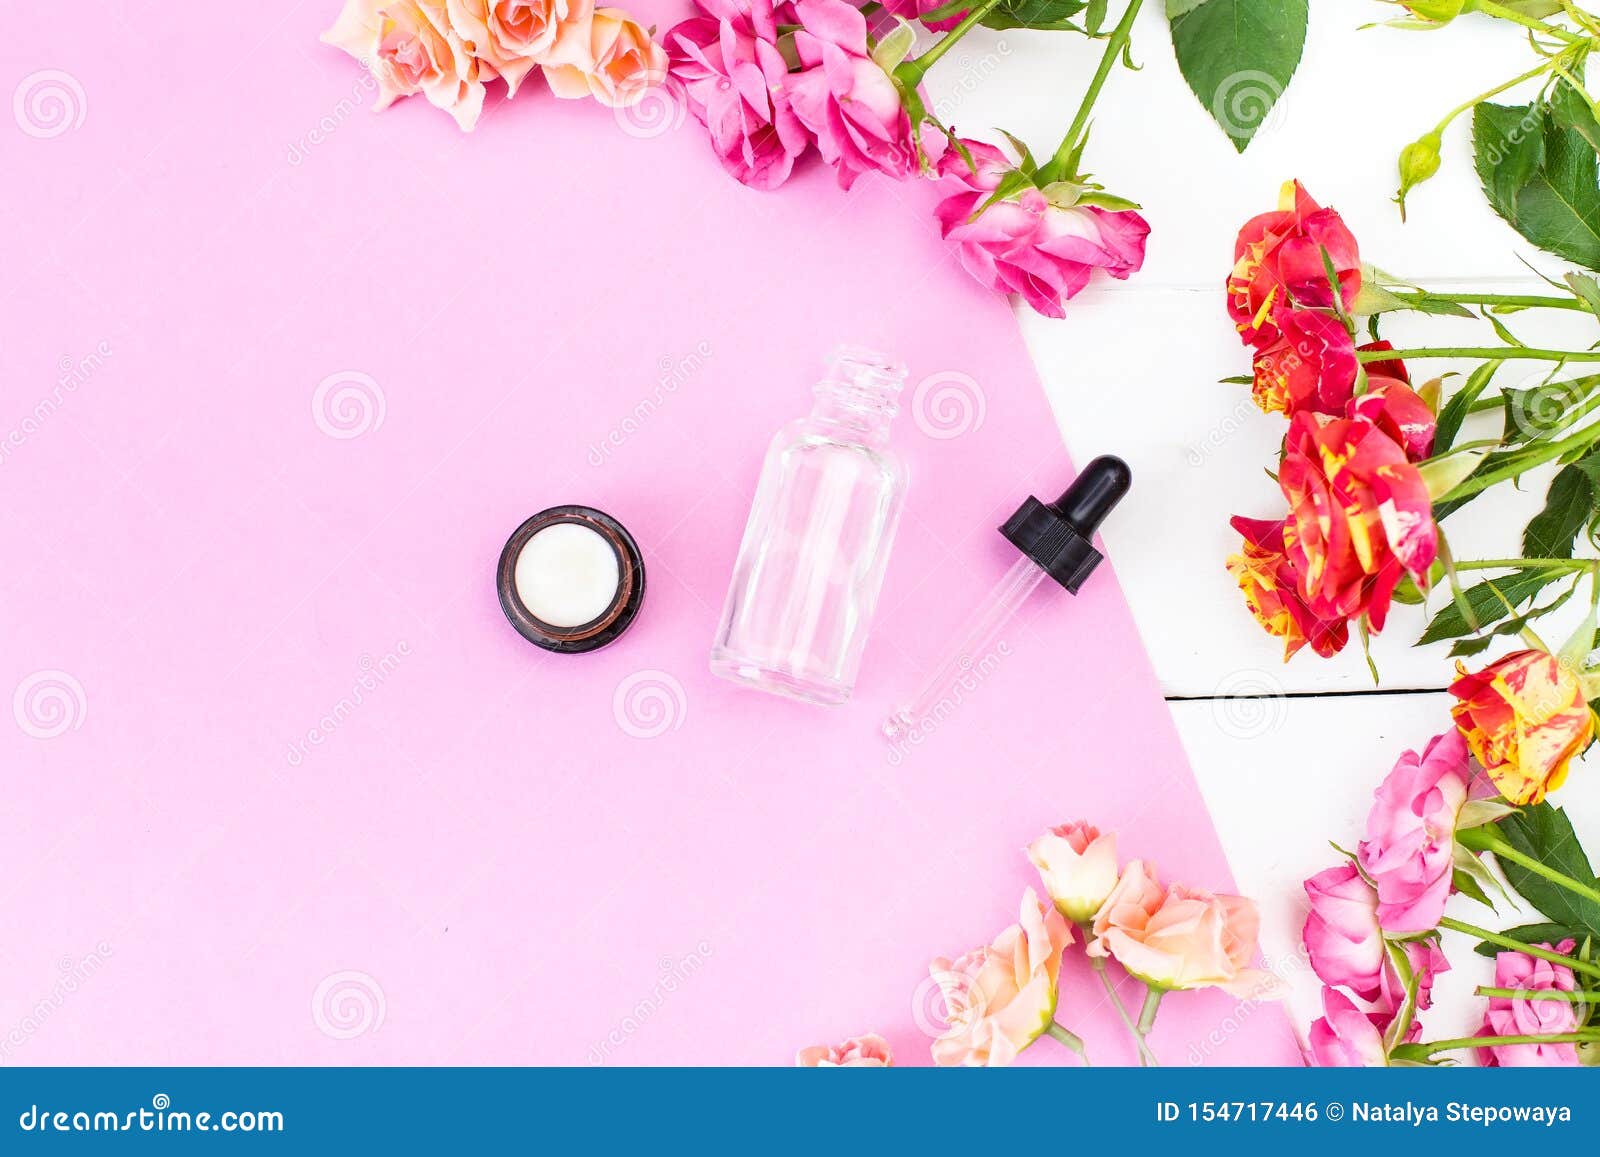 crema skincare cosmetics essence, oil on a pink and white desk. beauty background mock up